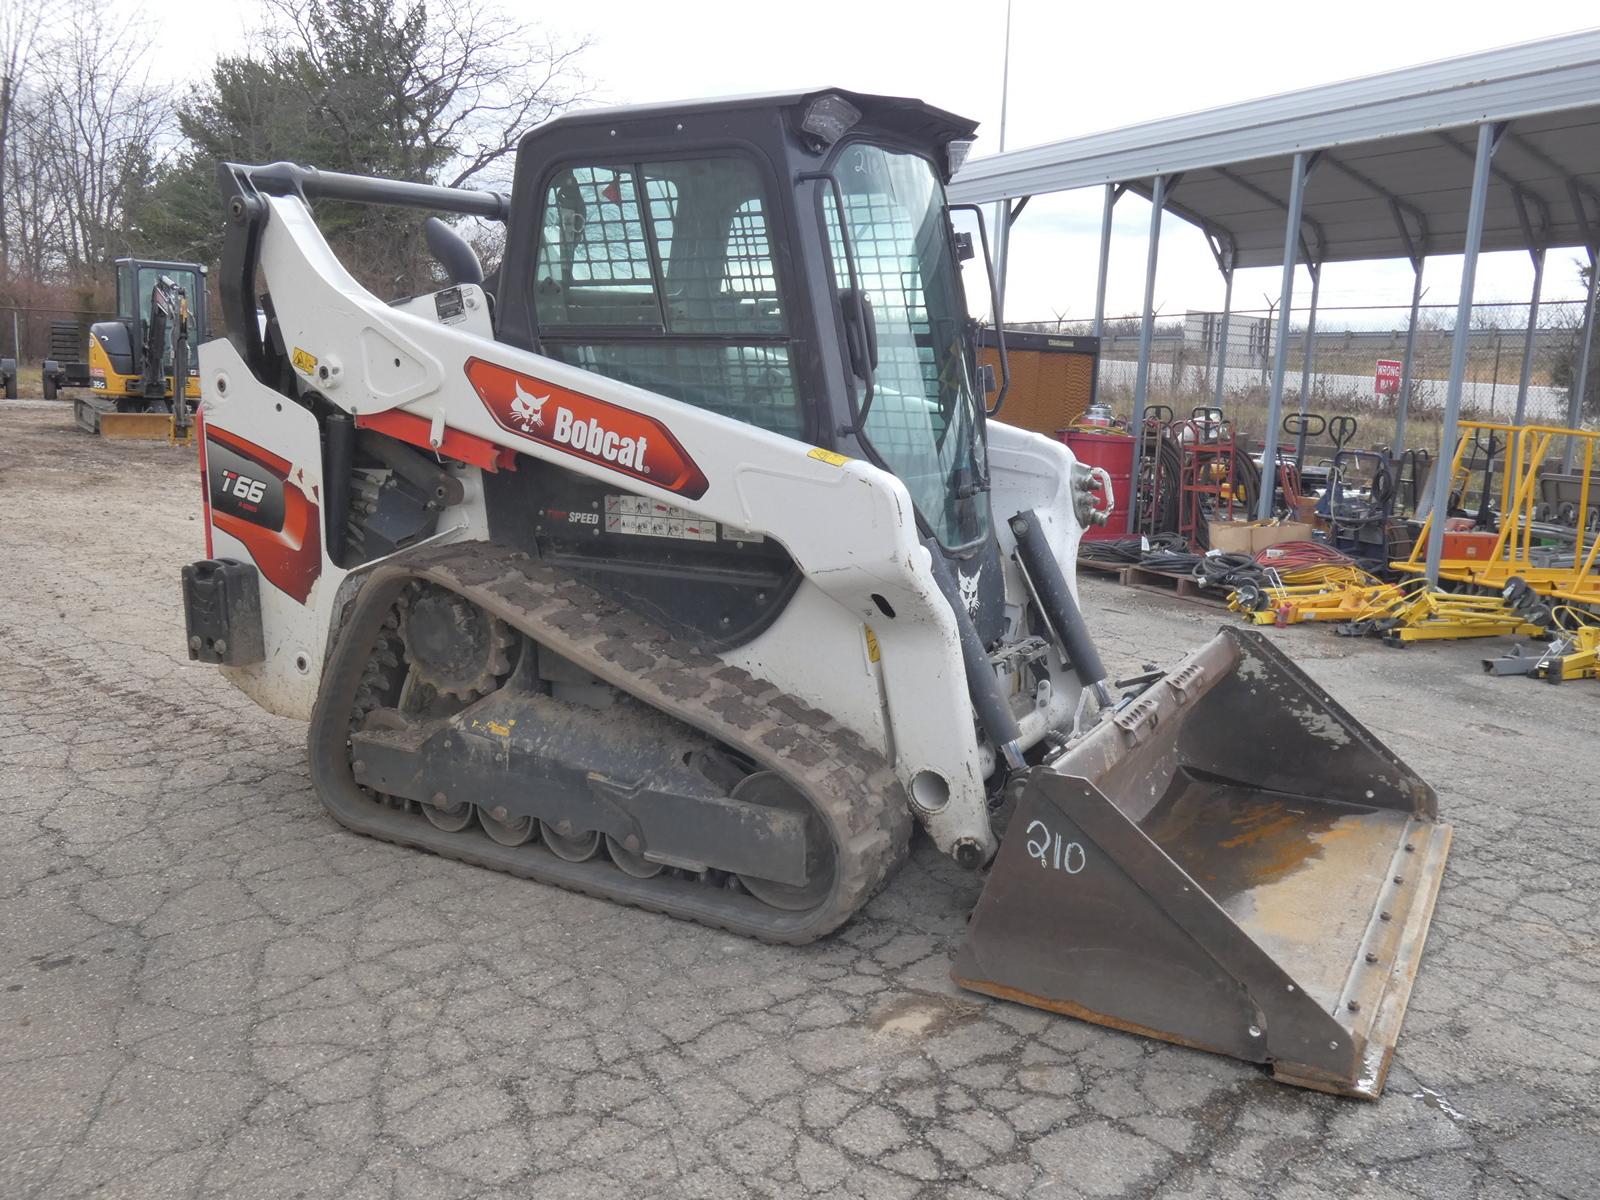 2021 Bobcat T66 Compact Track Loader, SN:B4SB16877, Cab w/ Air, 2 Speed, IS